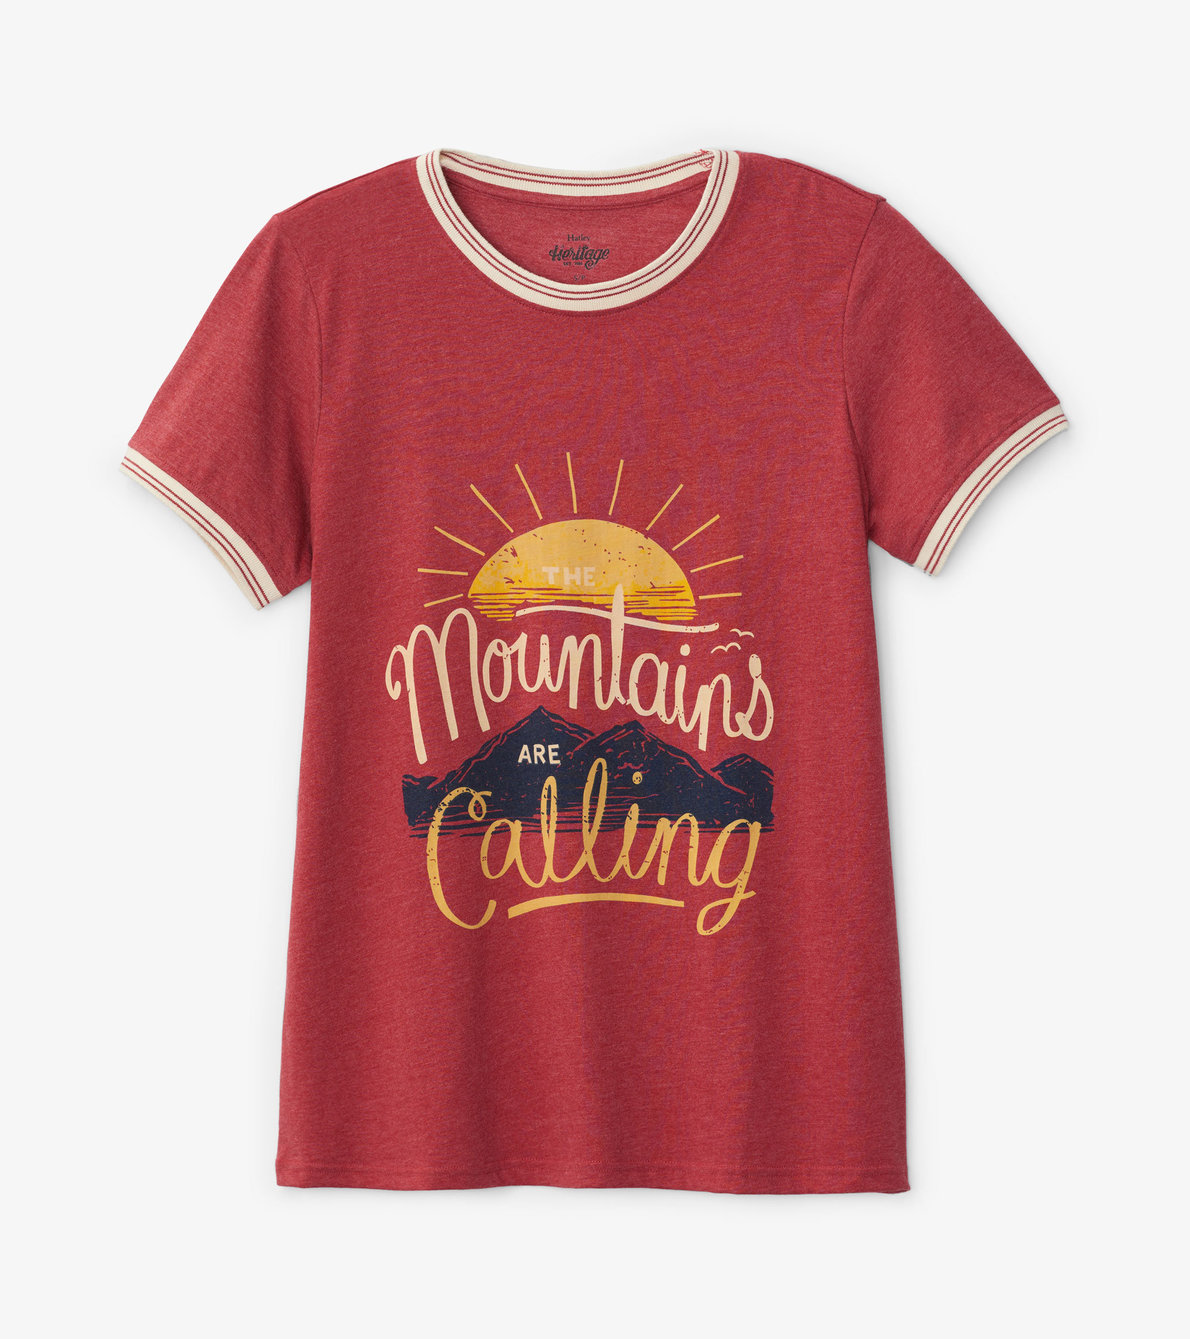 View larger image of Mountains are Calling Women's Heritage Slub Jersey Top